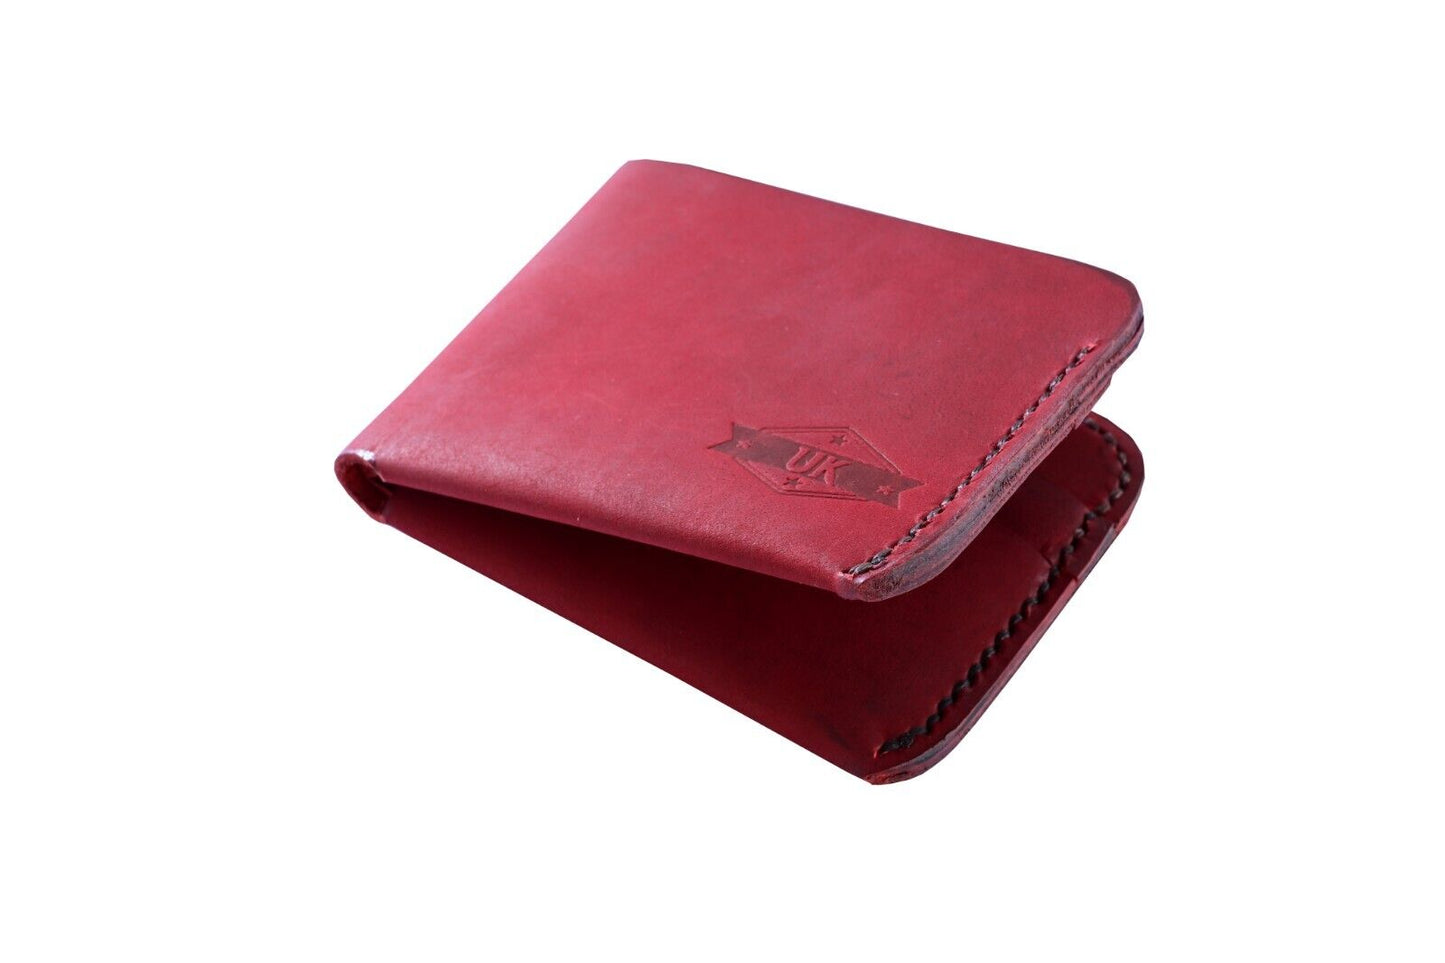 Urban Kevlar Handcrafted Genuine Leather Wallet - Classic Men's Bifold Wallet - Gift For Mens Cherry Red